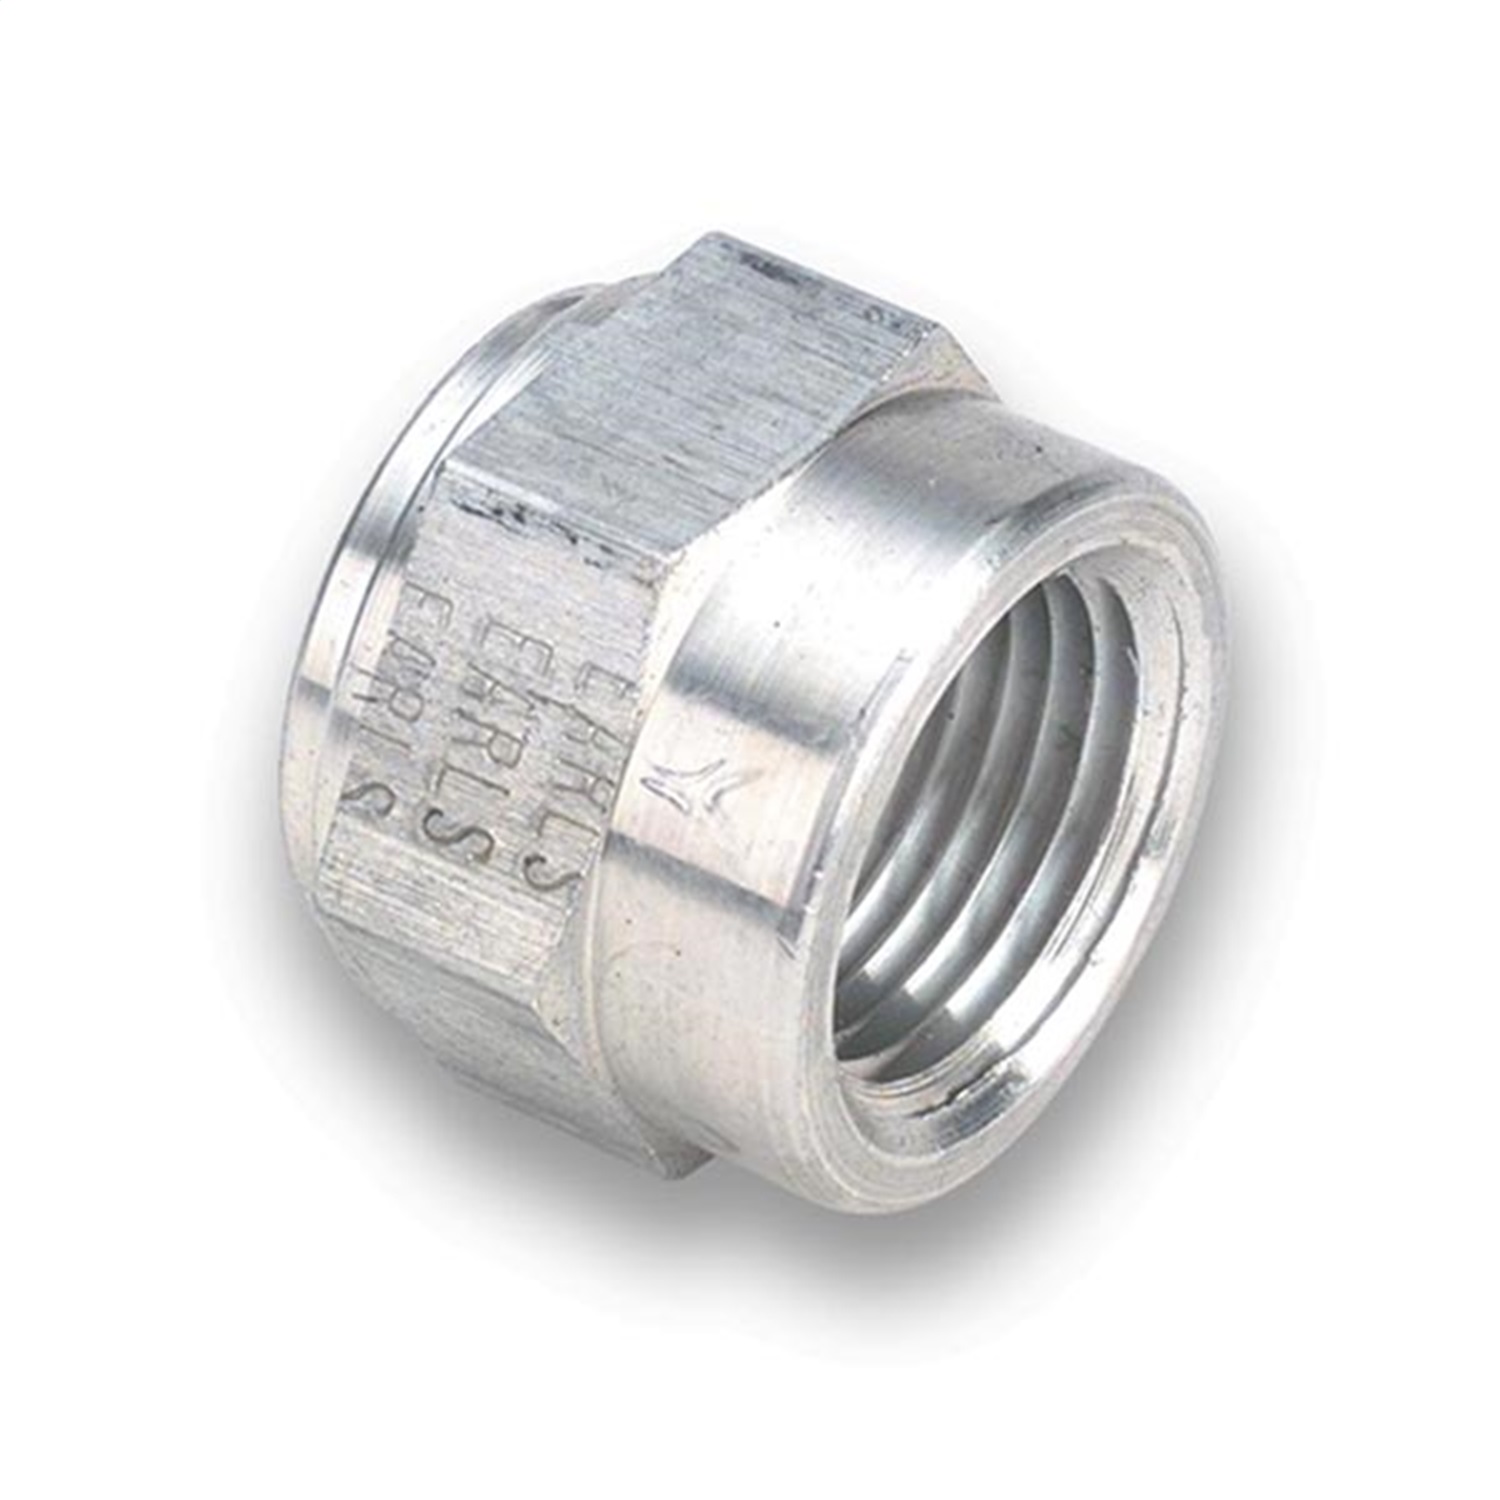 Aluminum NPT Weld Fitting; Size: 1/8 in. NPT Female; Bare; Bagged Packaging; - 996701ERL